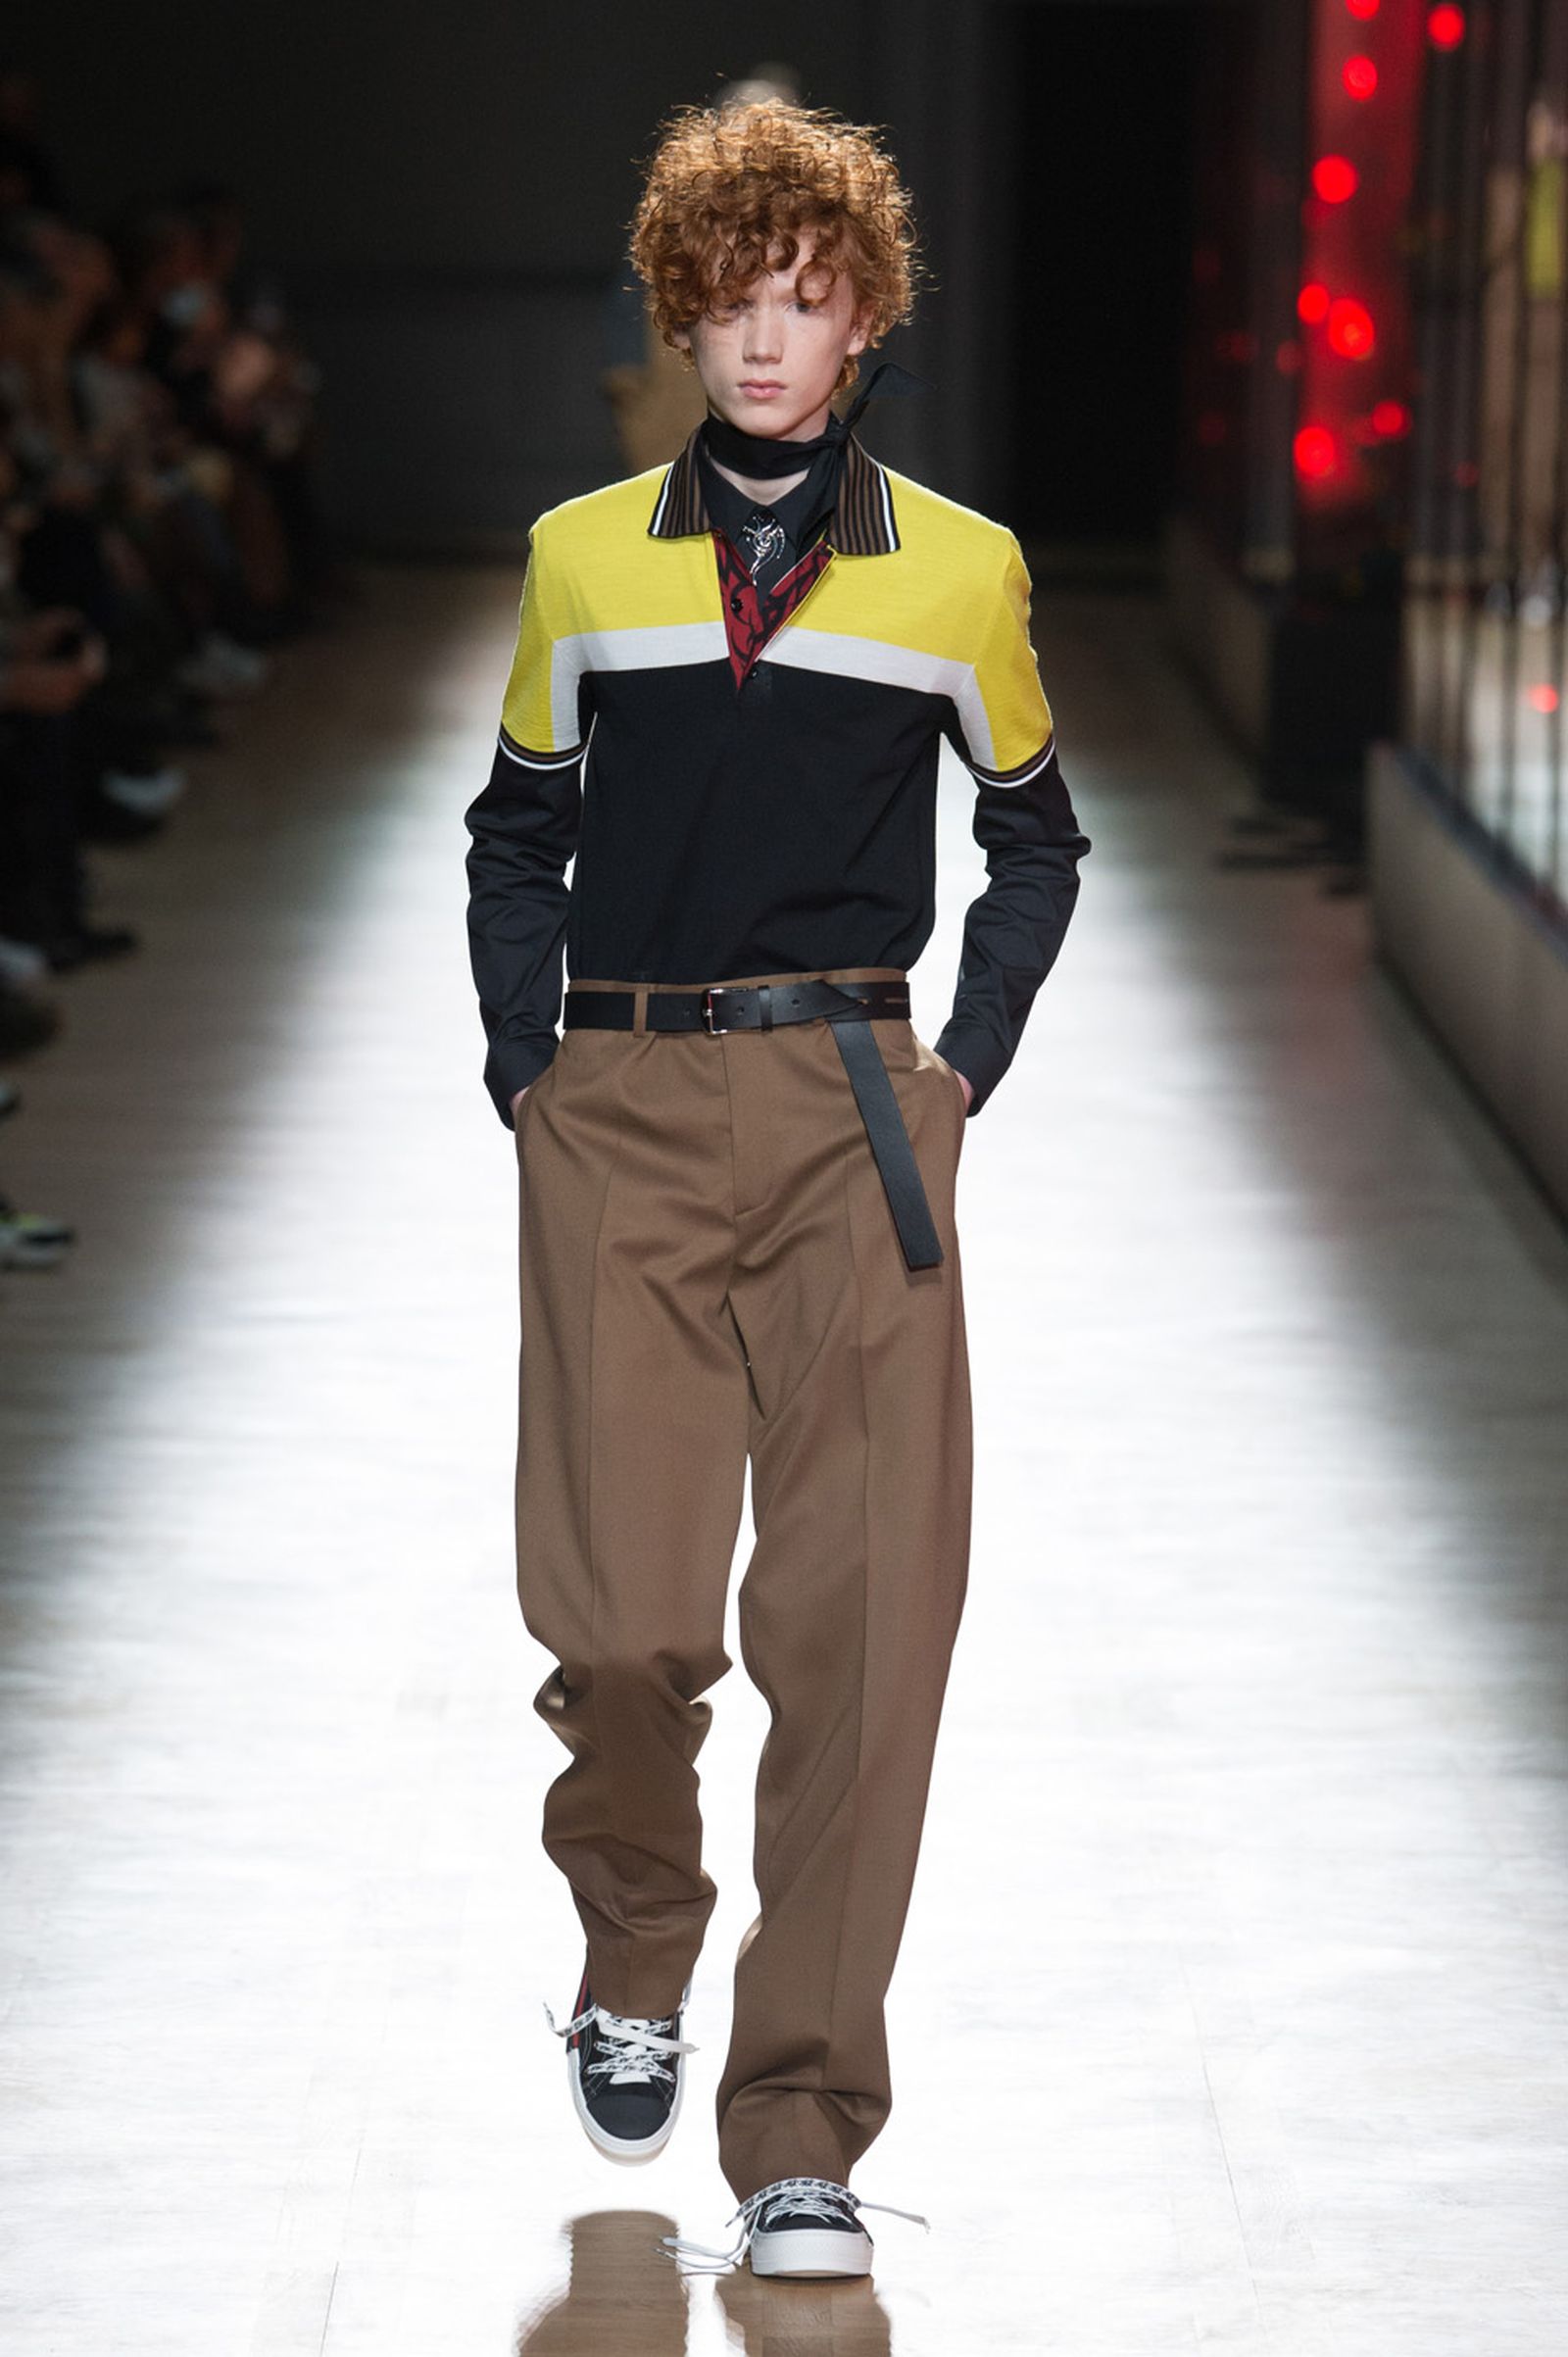 DIOR HOMME WINTER 18 19 BY PATRICE STABLE look34 Fall/WInter 2018 runway